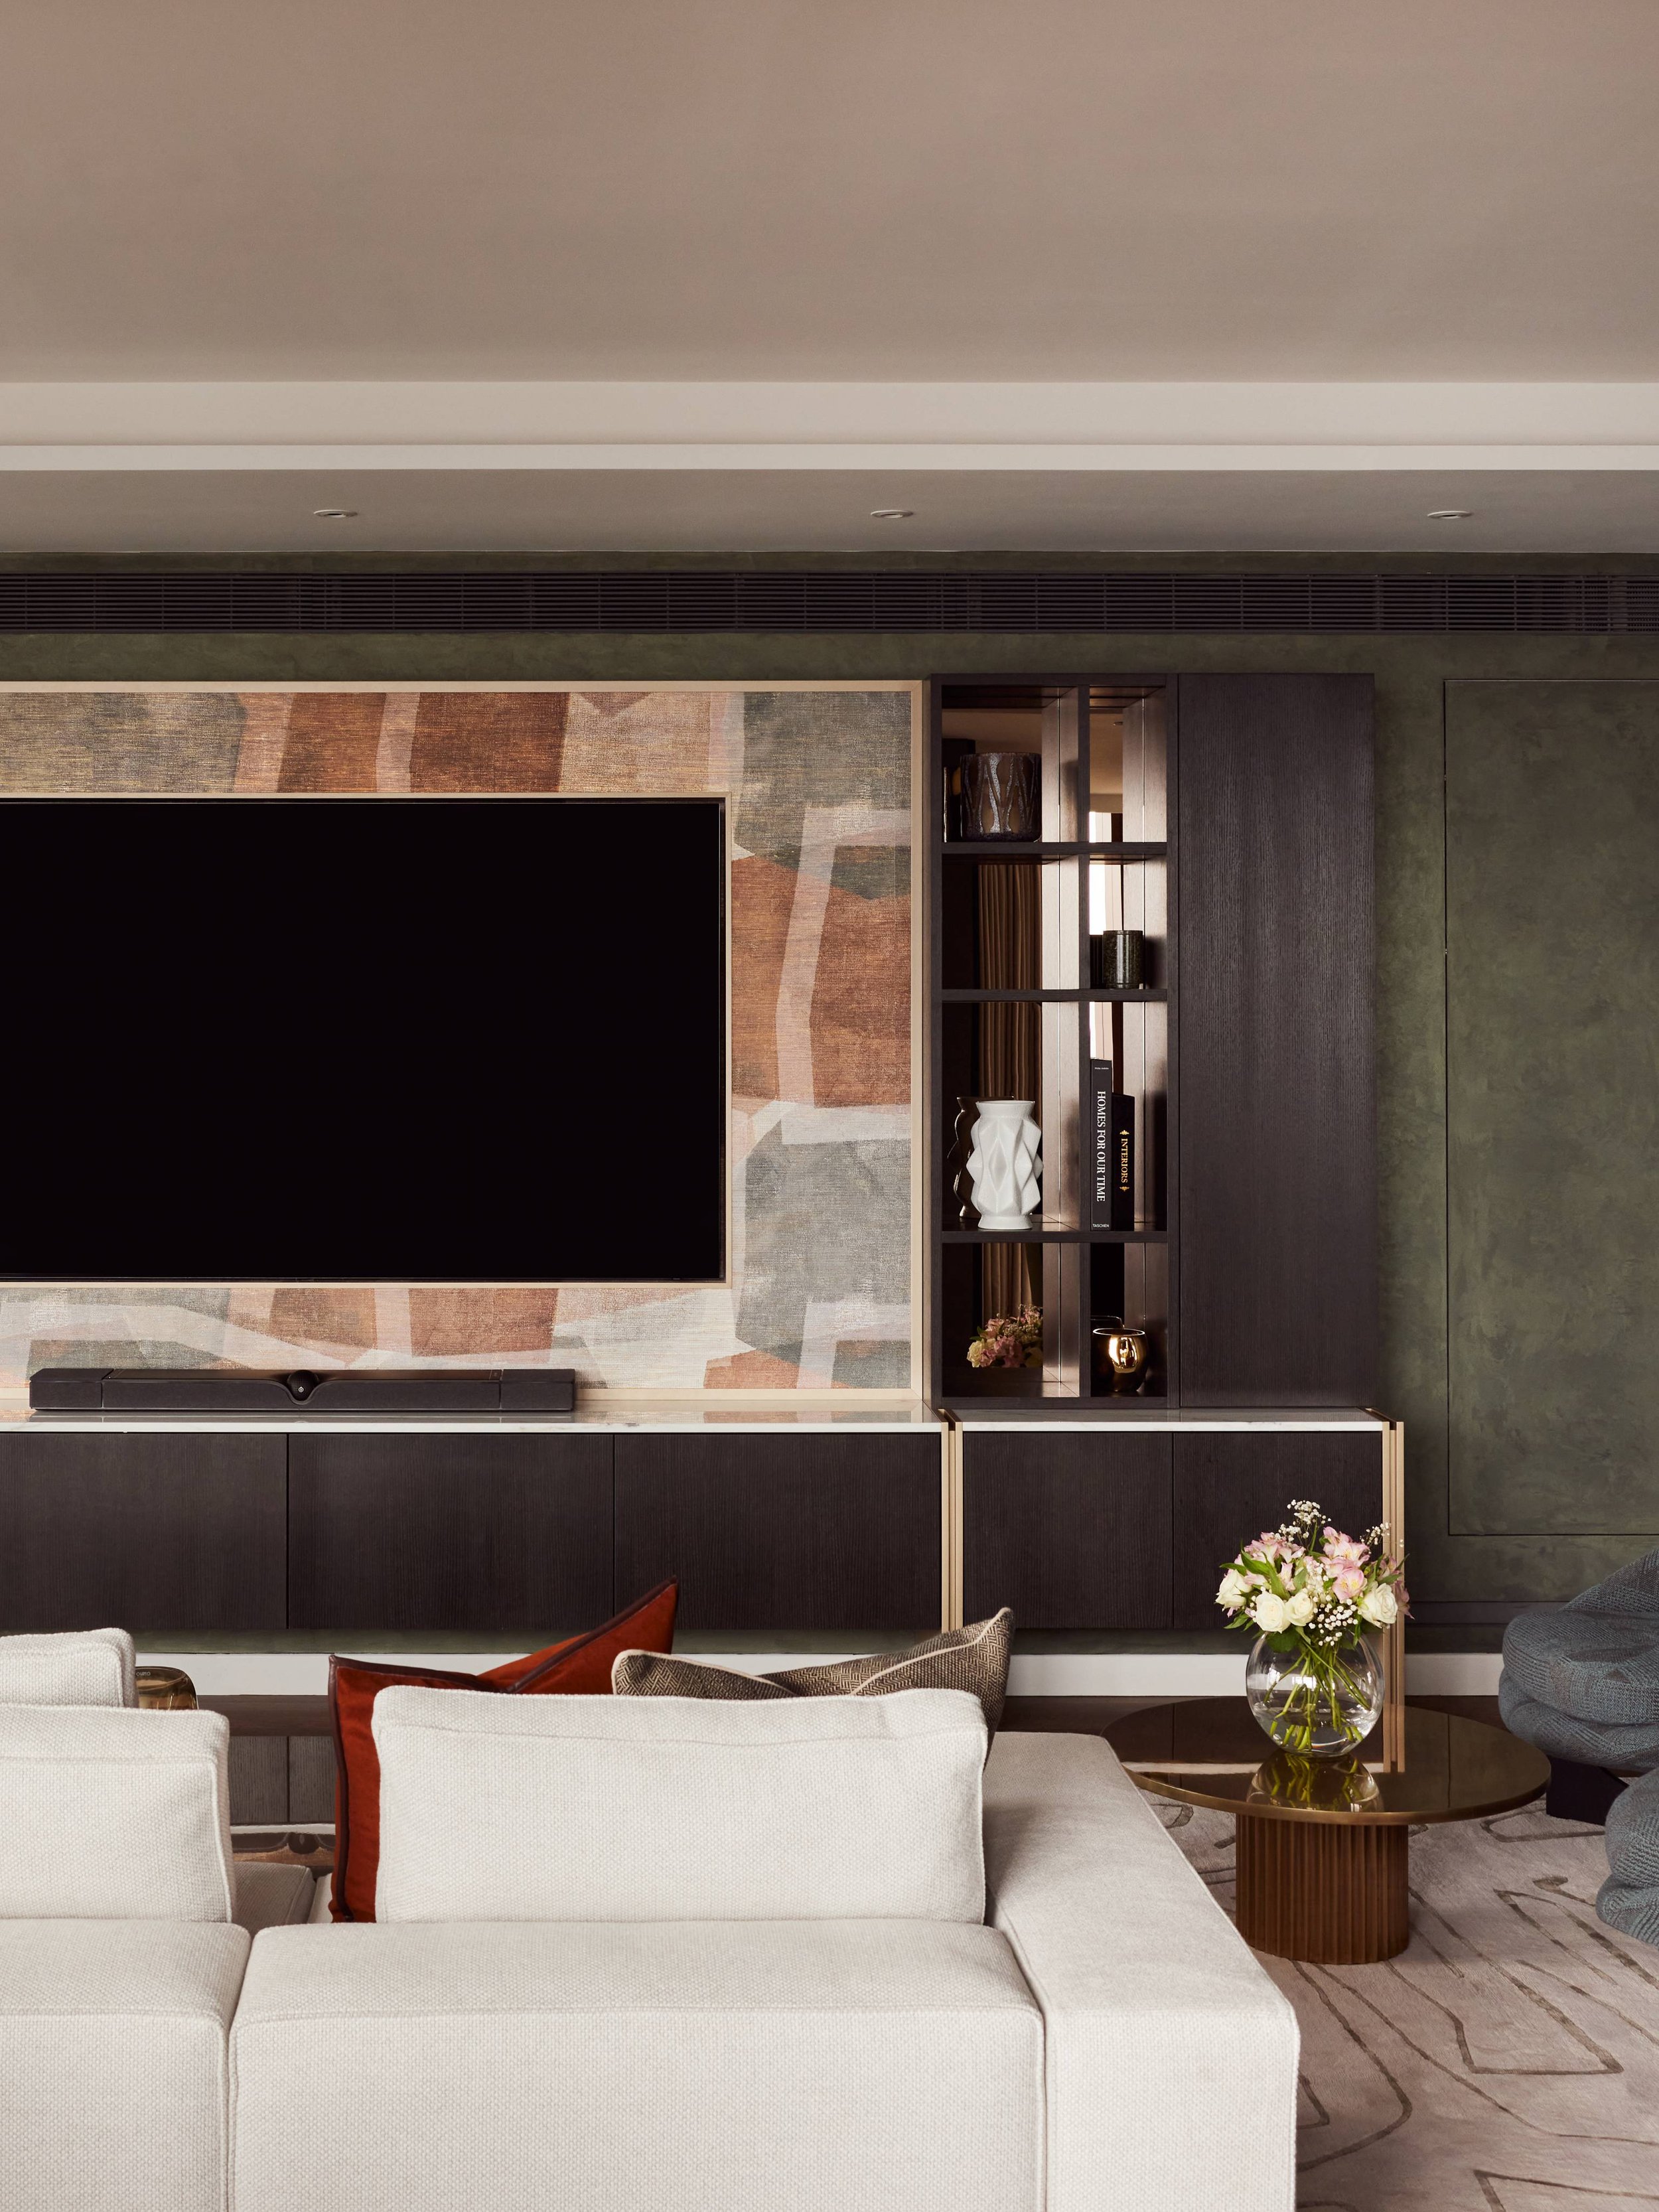 Thames City_Sky Collection_Harrods Interior Design Show Apartment_Lounge_Credit-TobyMitchell2023-.jpg